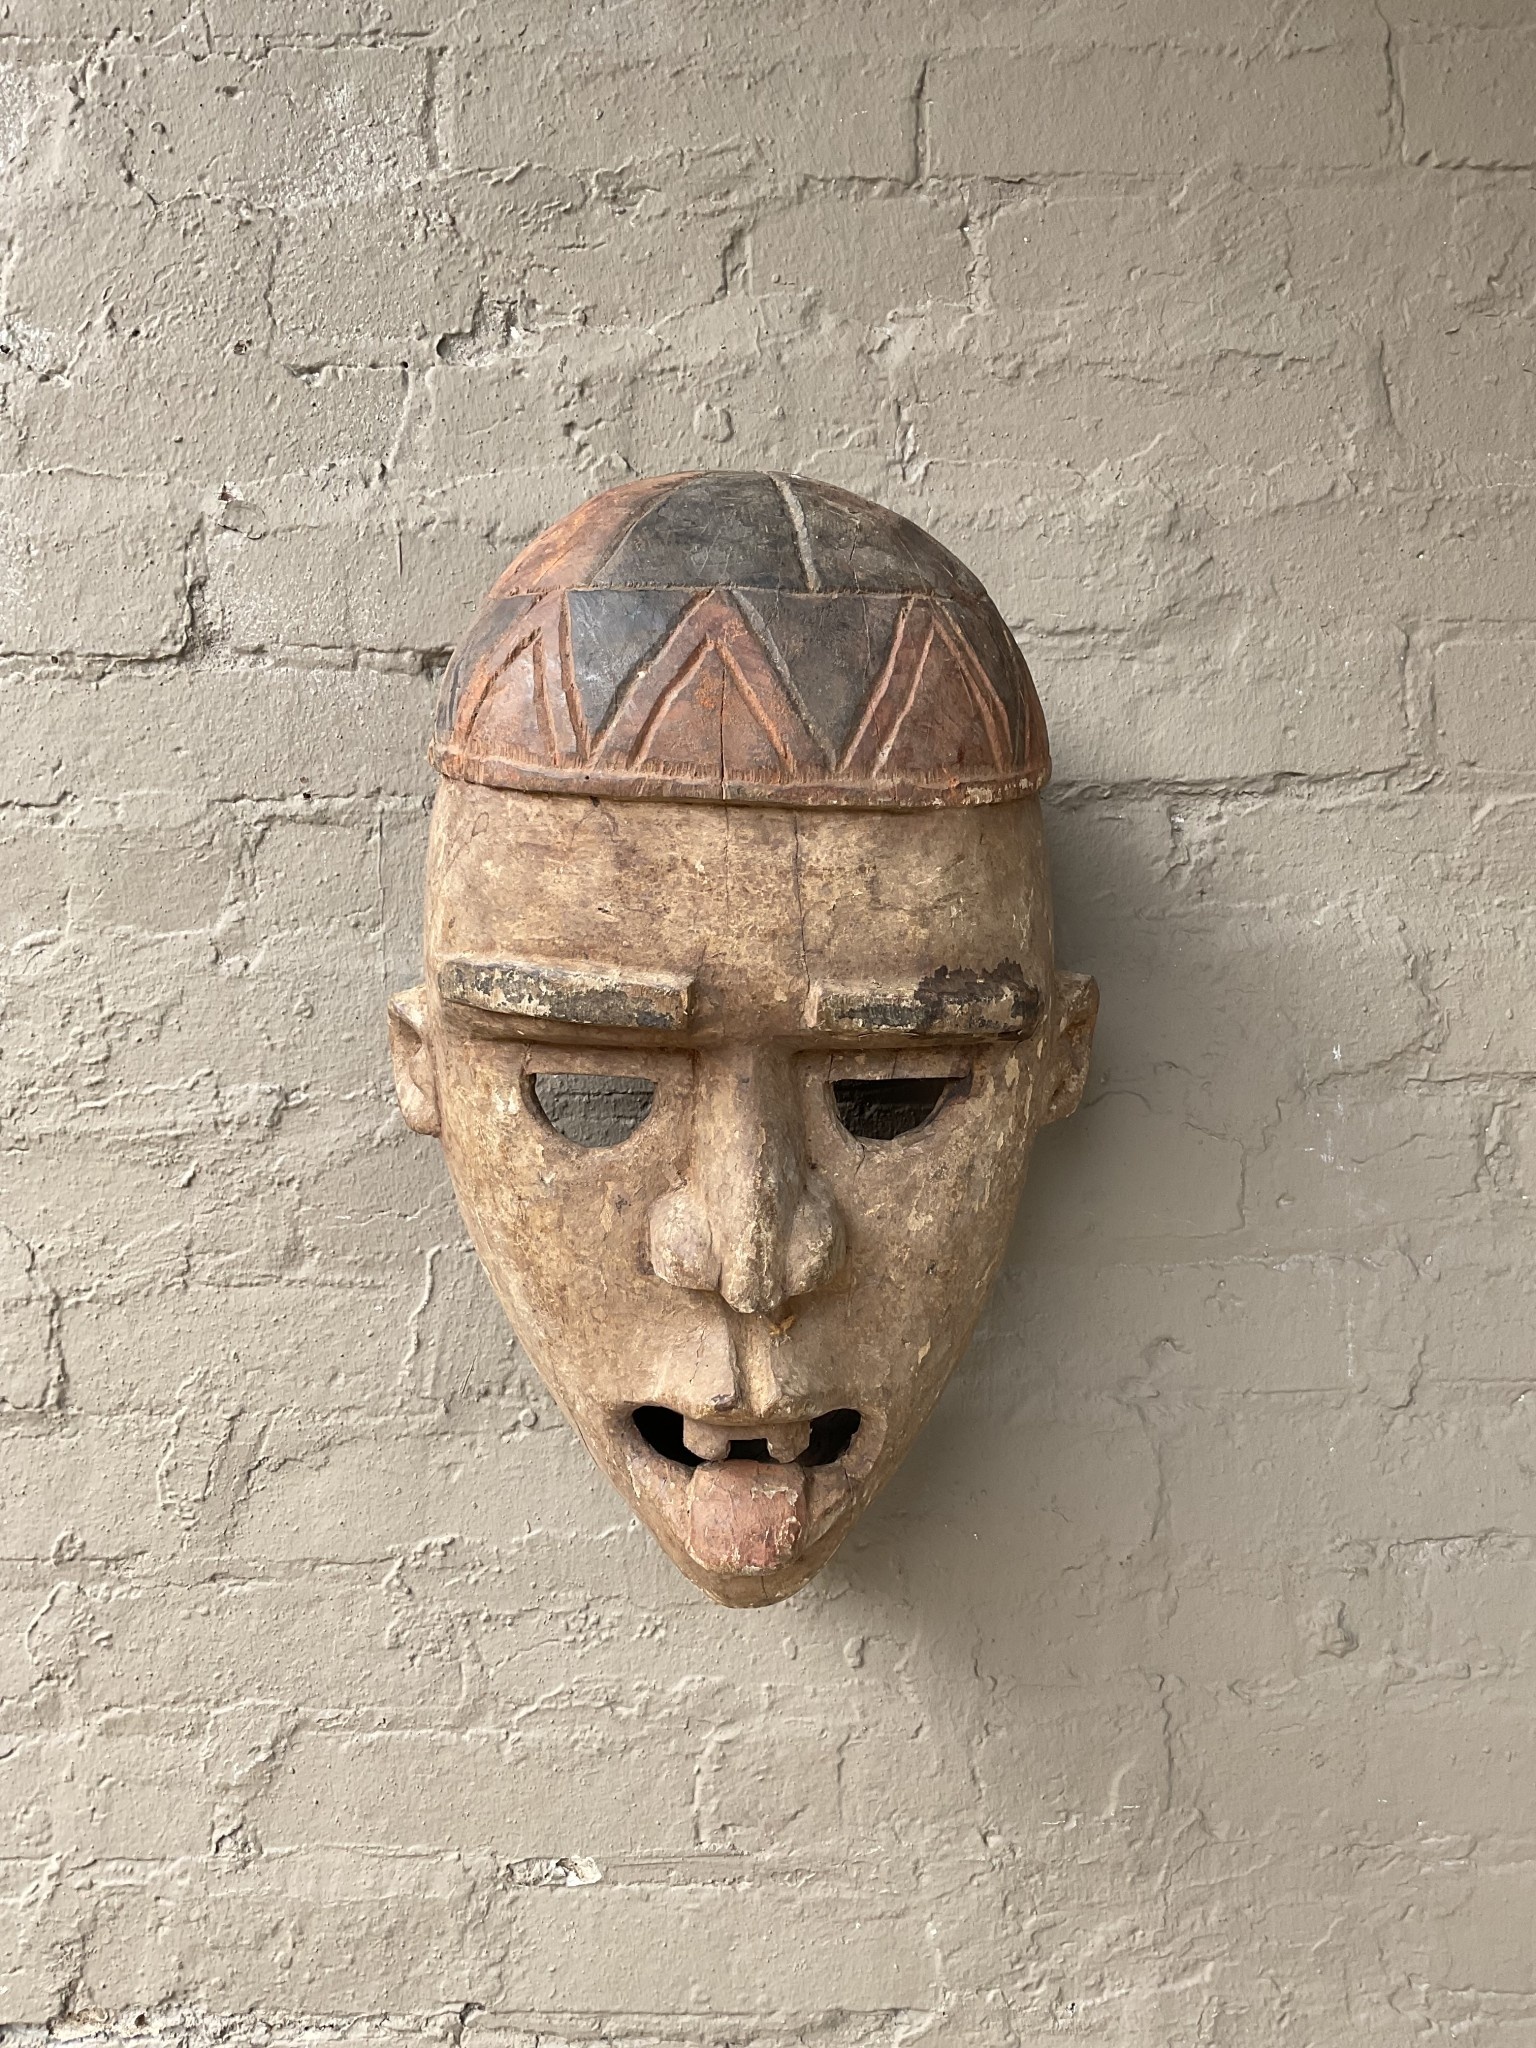 African Mask, Tongue Sticking Out